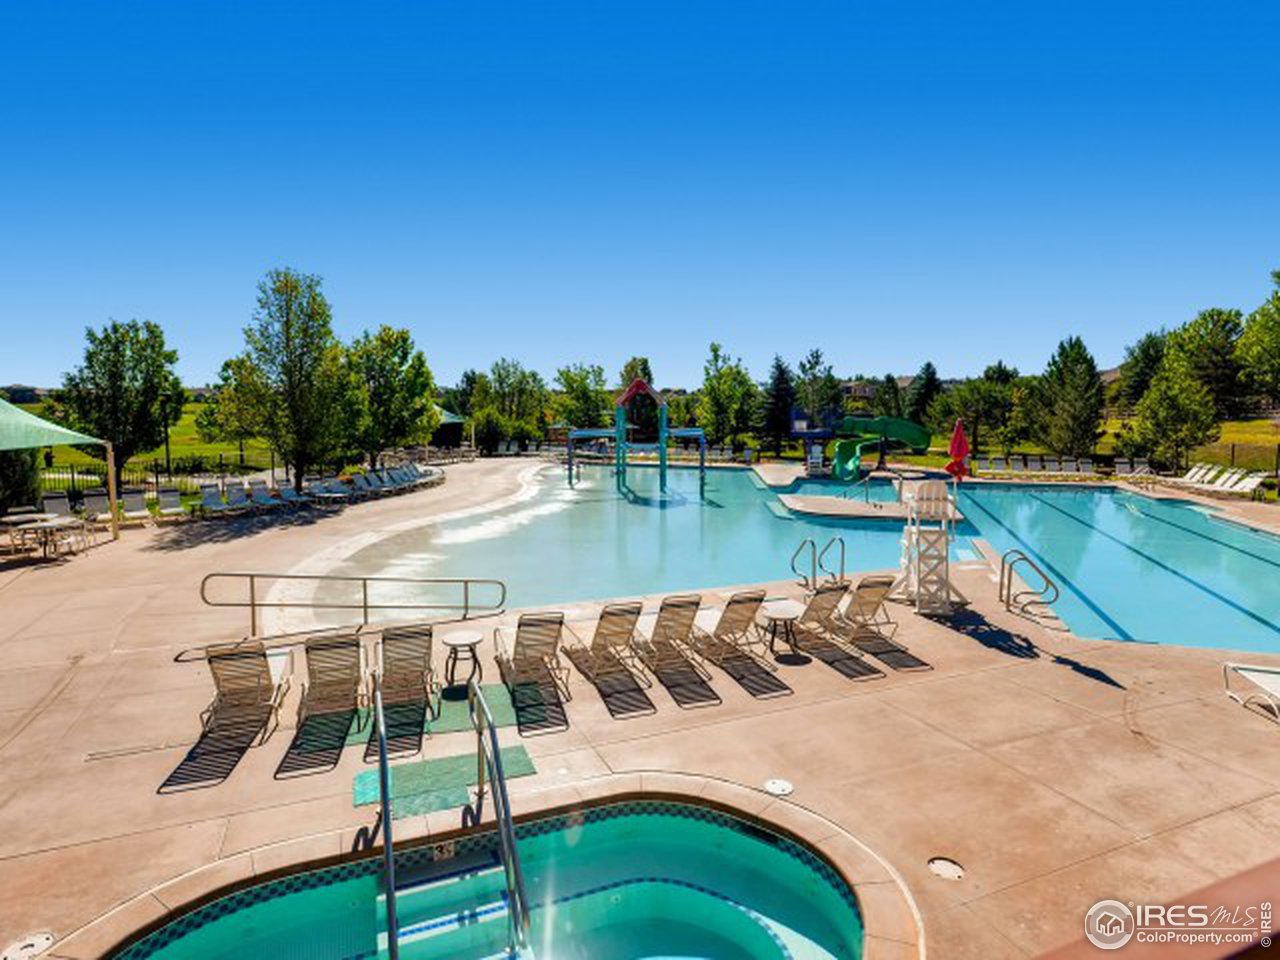 2nd outdoor pool